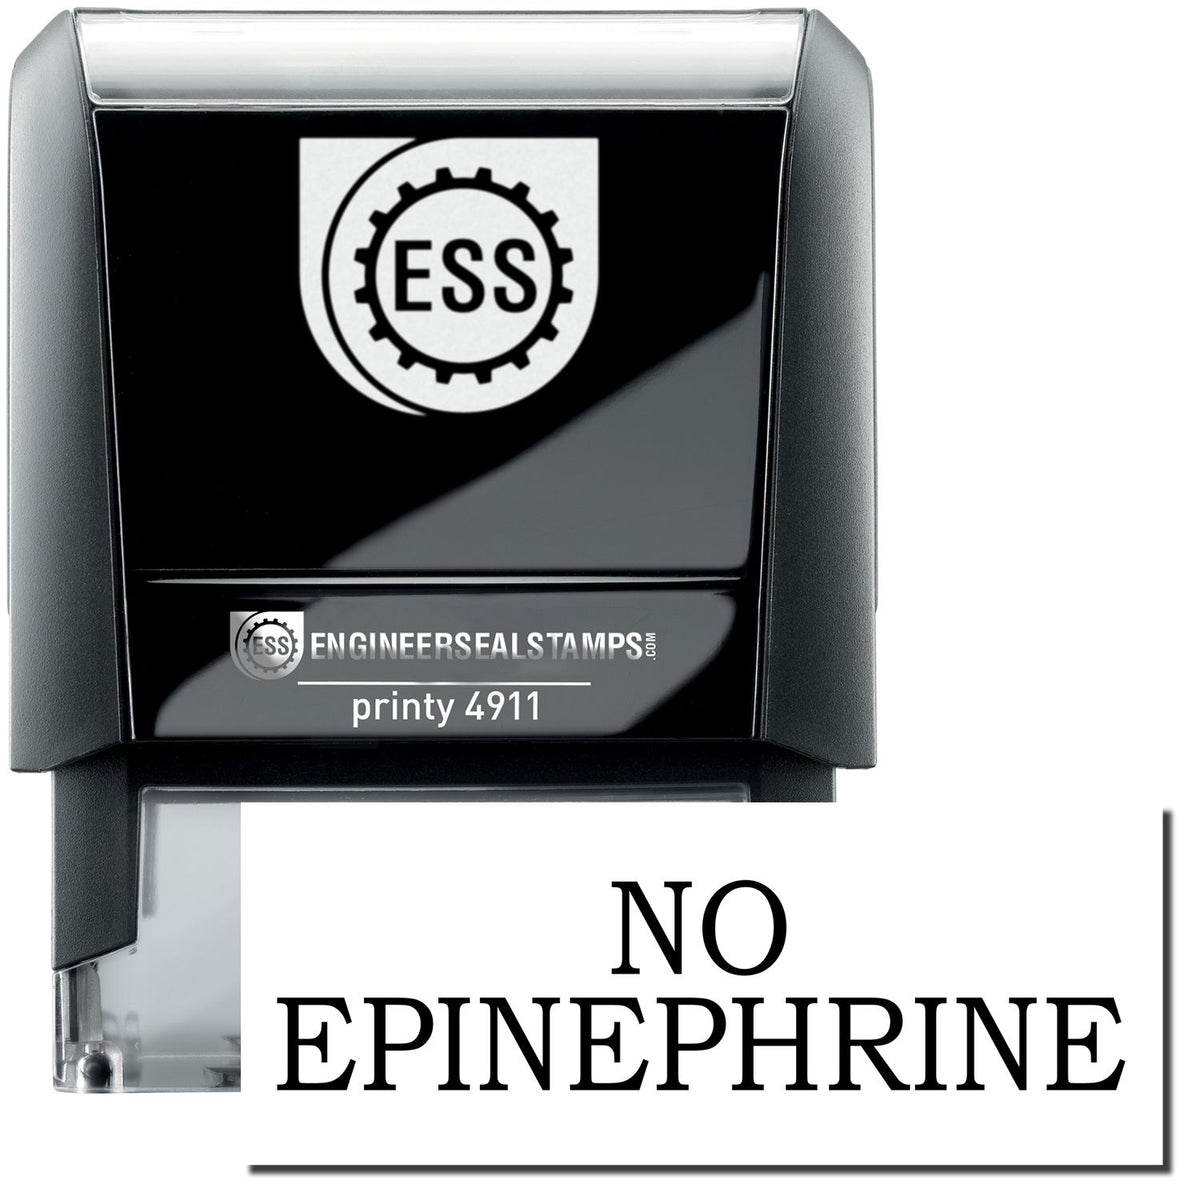 A self-inking stamp with a stamped image showing how the text &quot;NO EPINEPHRINE&quot; is displayed after stamping.